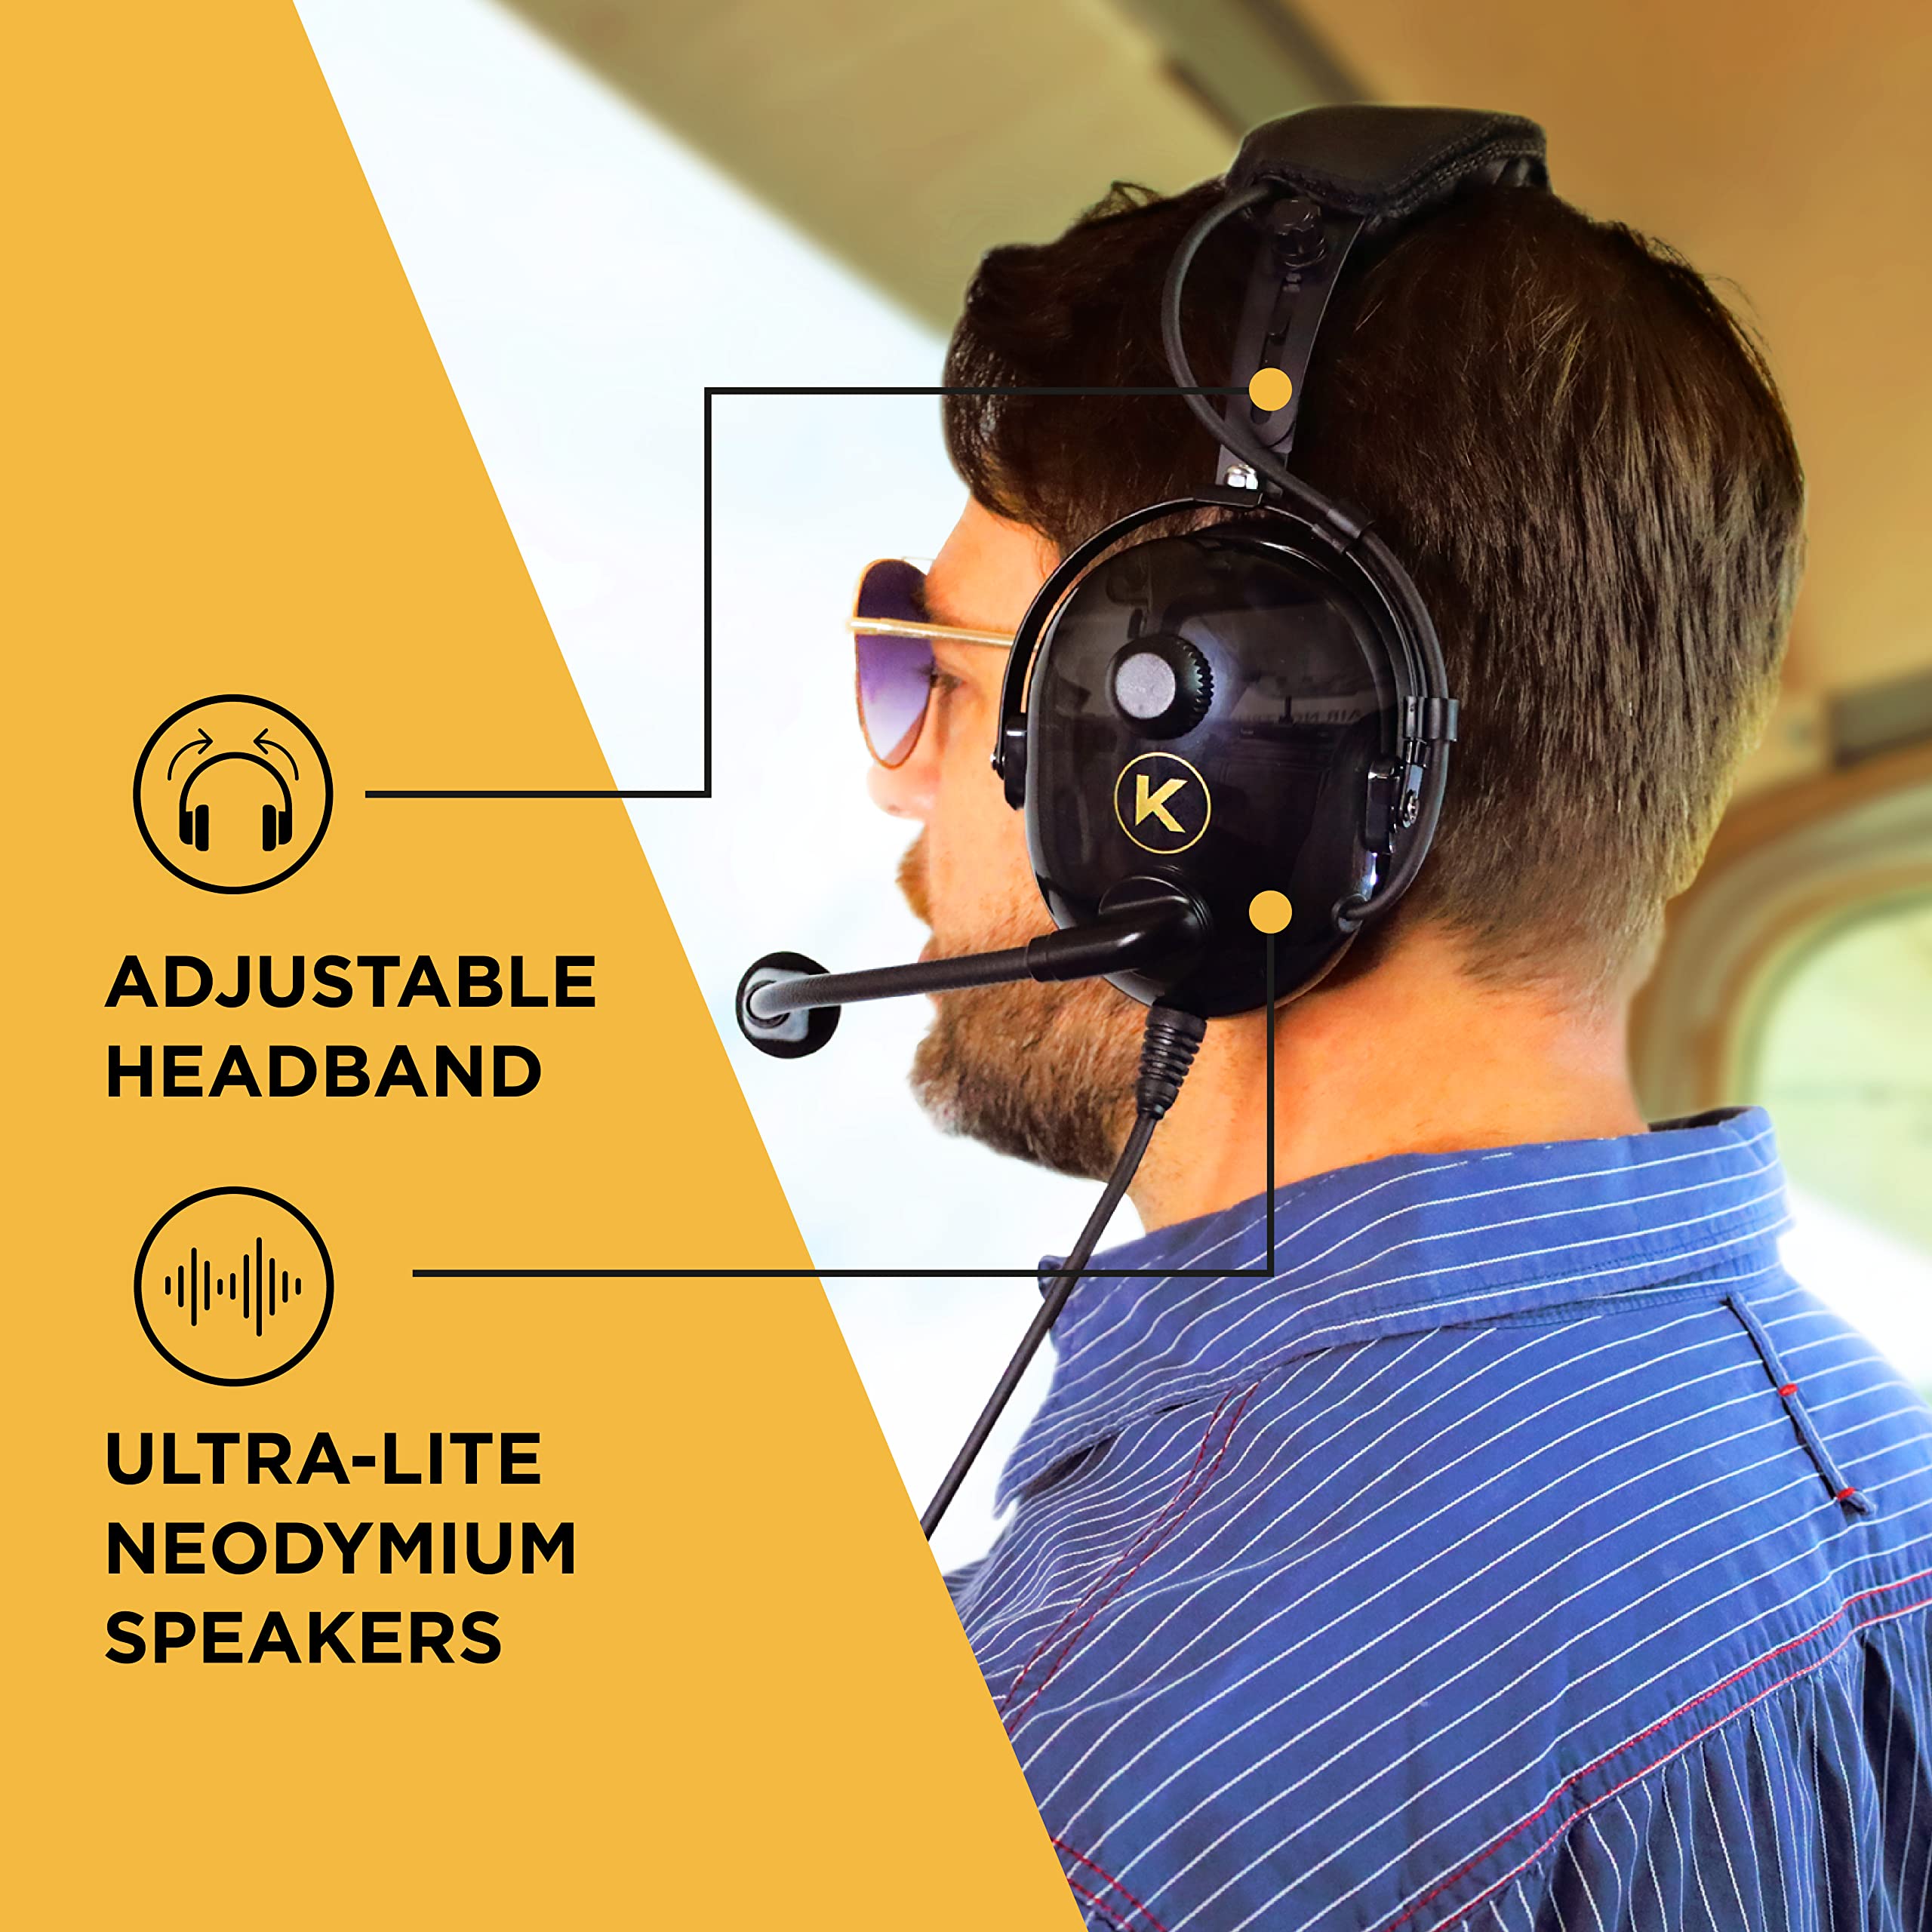 KORE AVIATION KA-1 General Aviation Headset for Pilots | Mono and Stereo Compatibility, Passive Noise Reduction, Noise Canceling Microphone, Gel Ear Seals, Adjustable Headband, Headset Bag